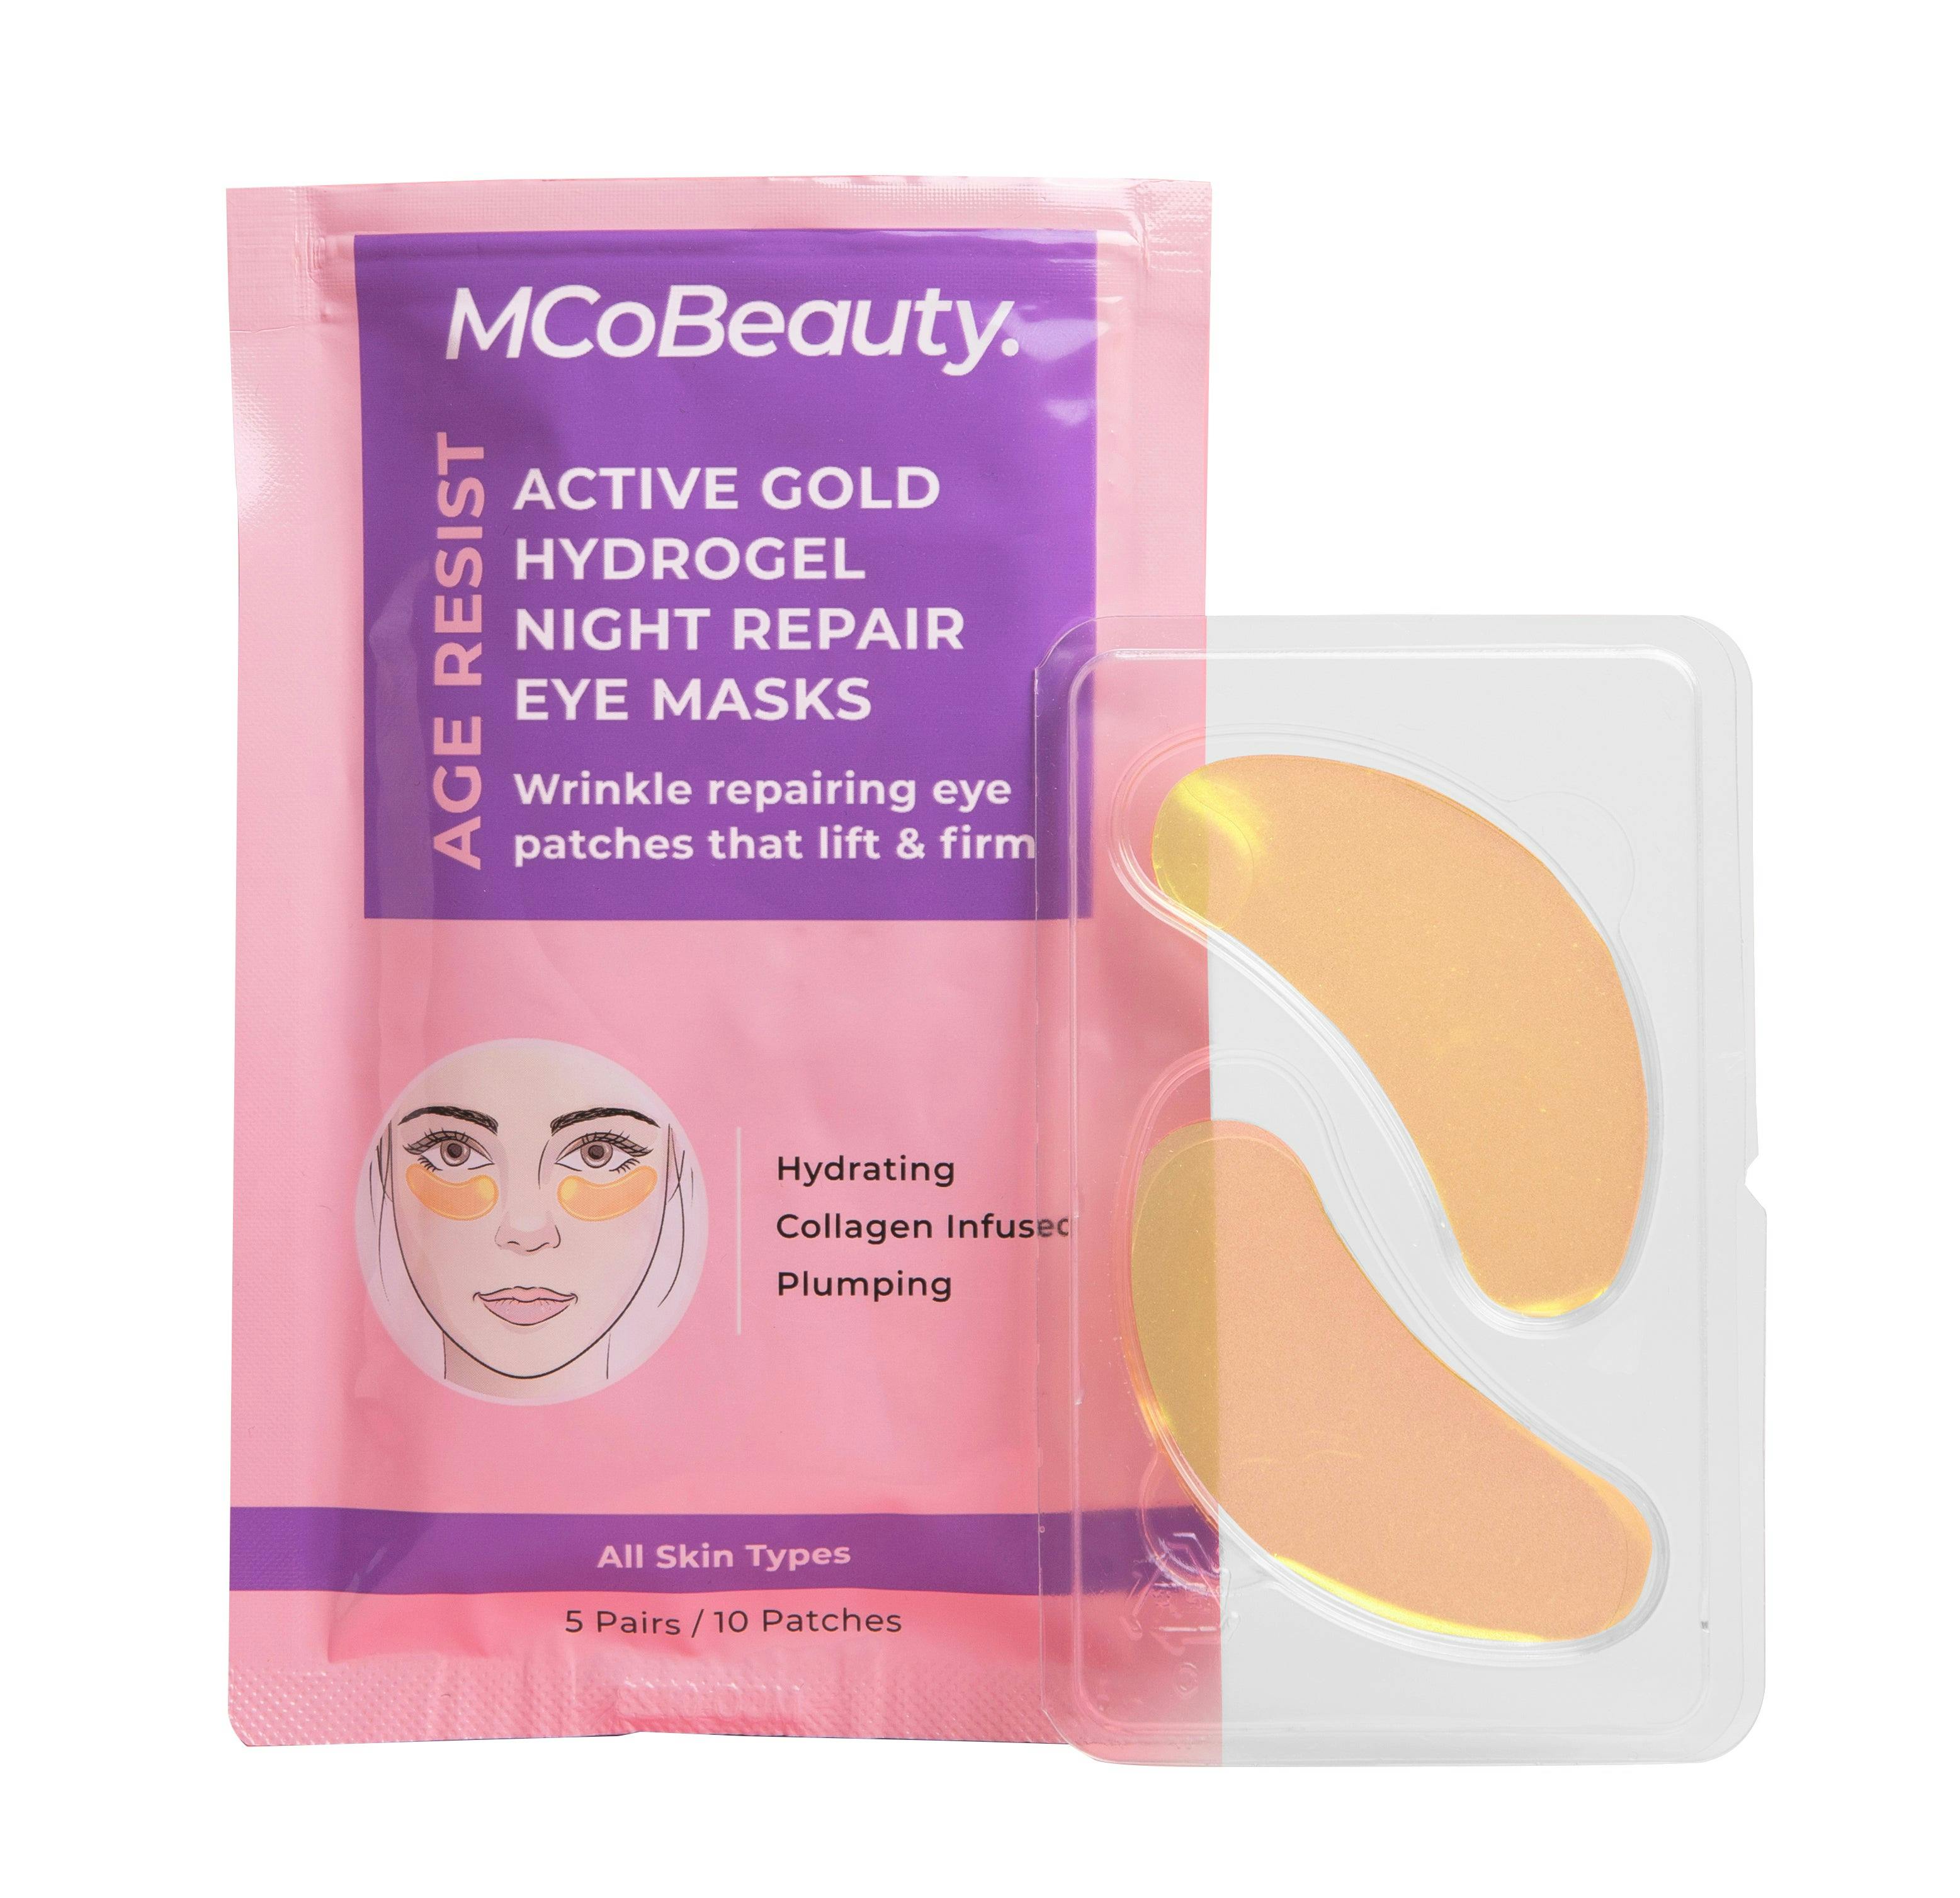 MCoBeauty Age Resist Active Gold Hydrogel Night Repair Eye Masks - 5 Pairs / 10 Patches